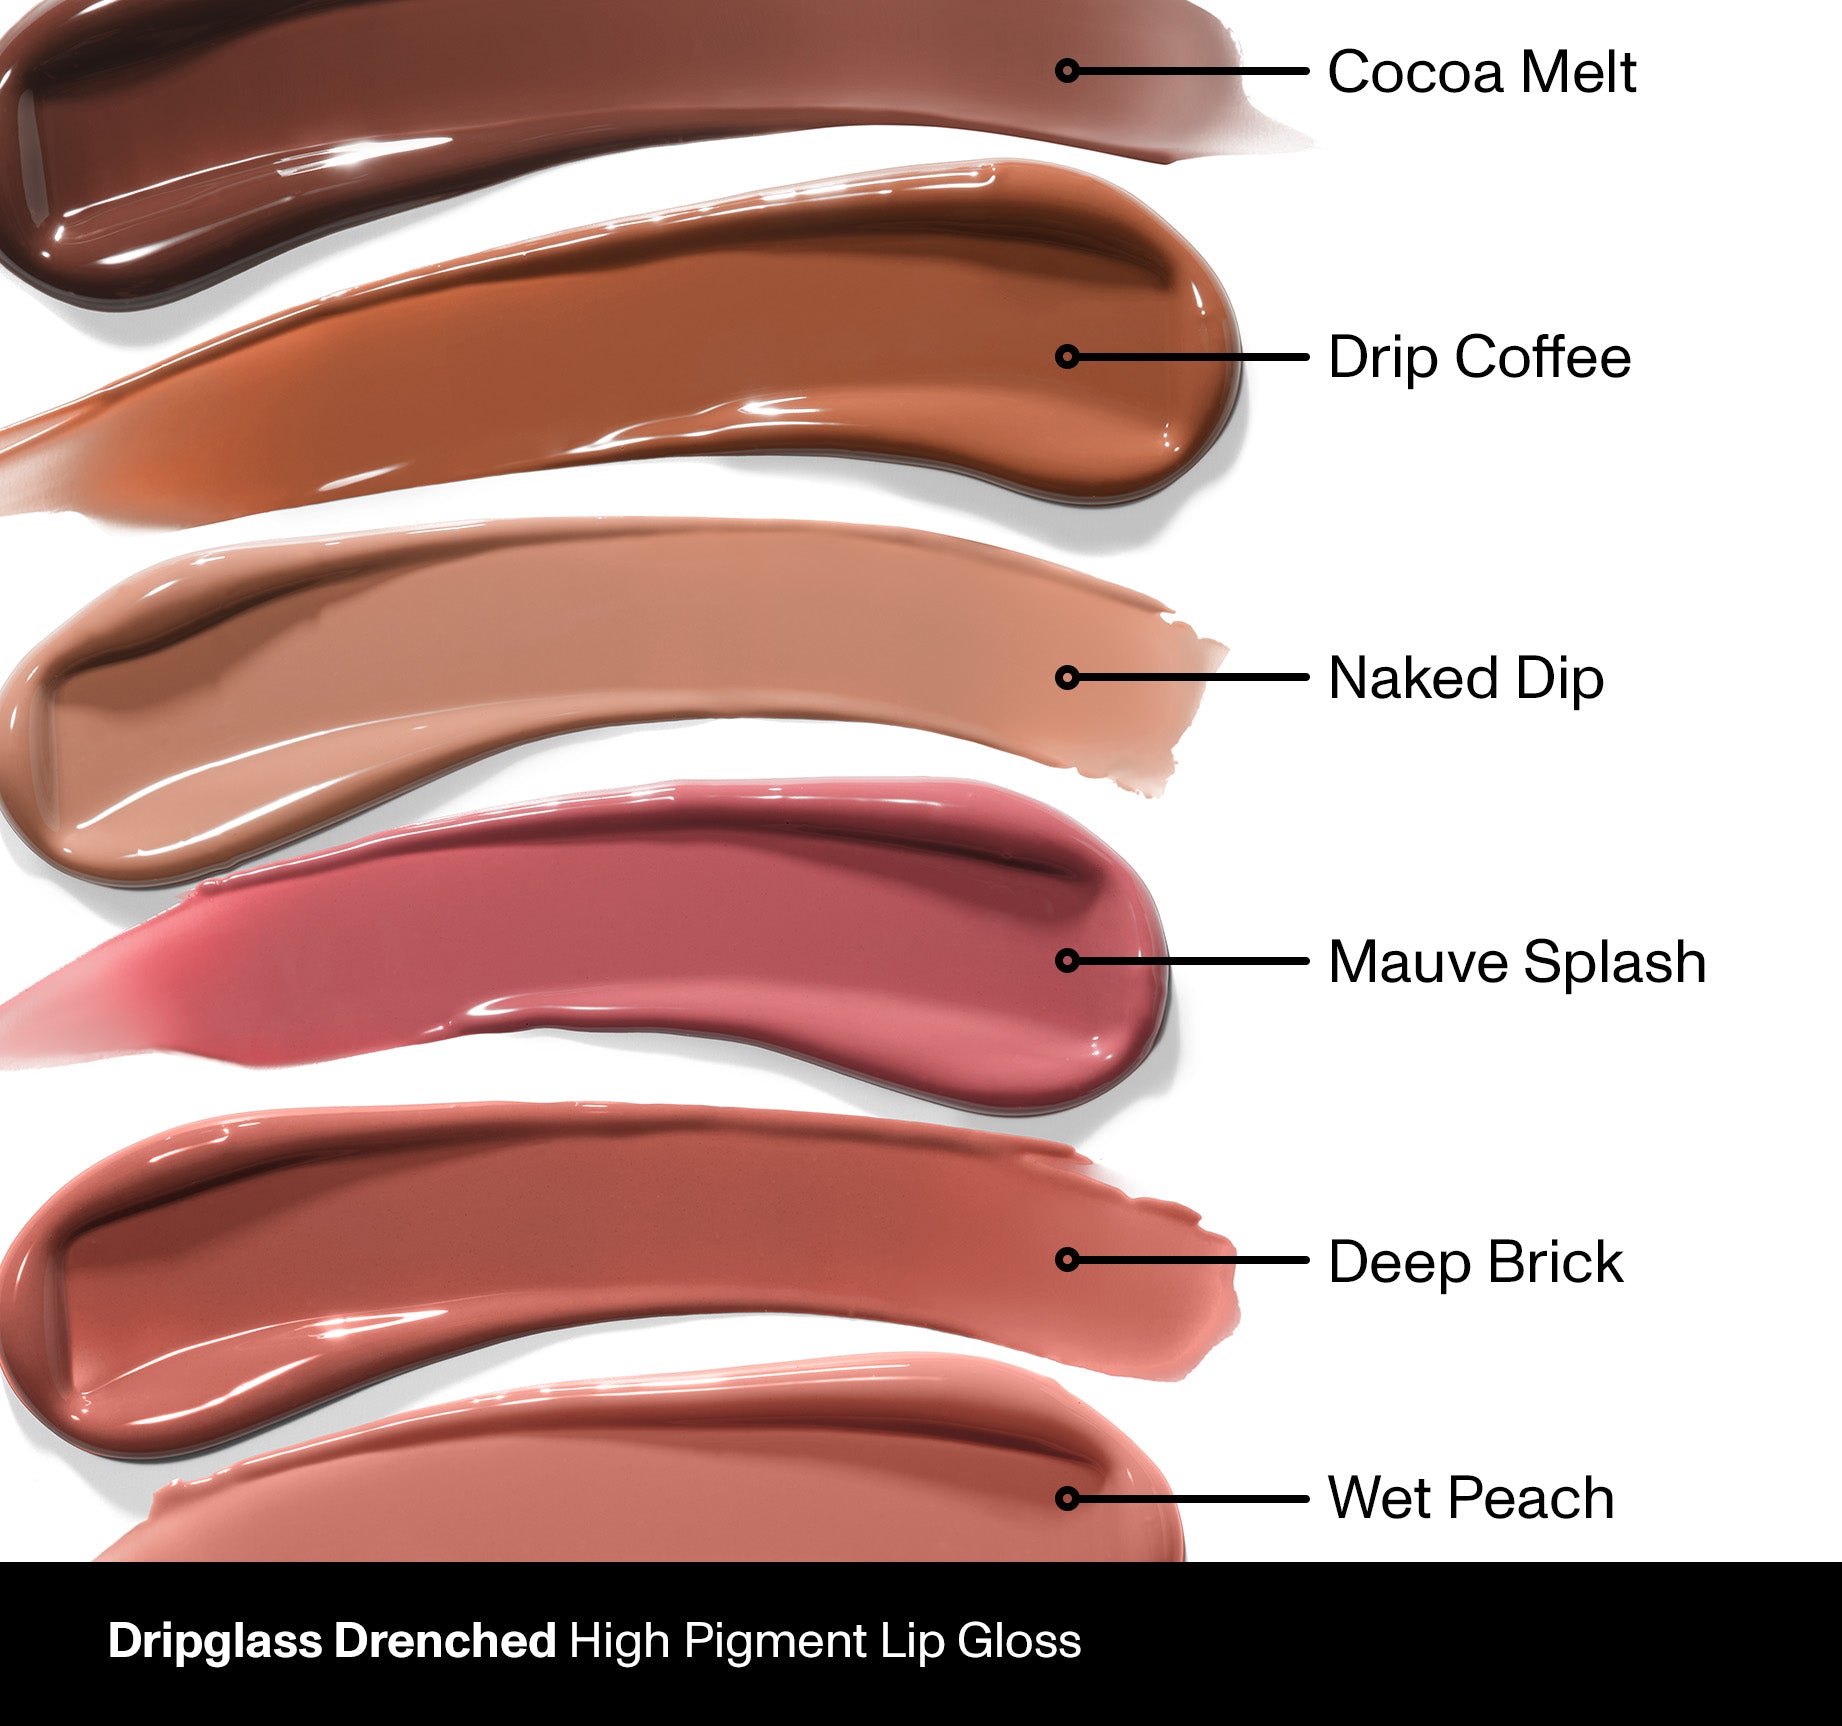 Dripglass Drenched High Pigment Lip Gloss - Drip Coffee - Image 4